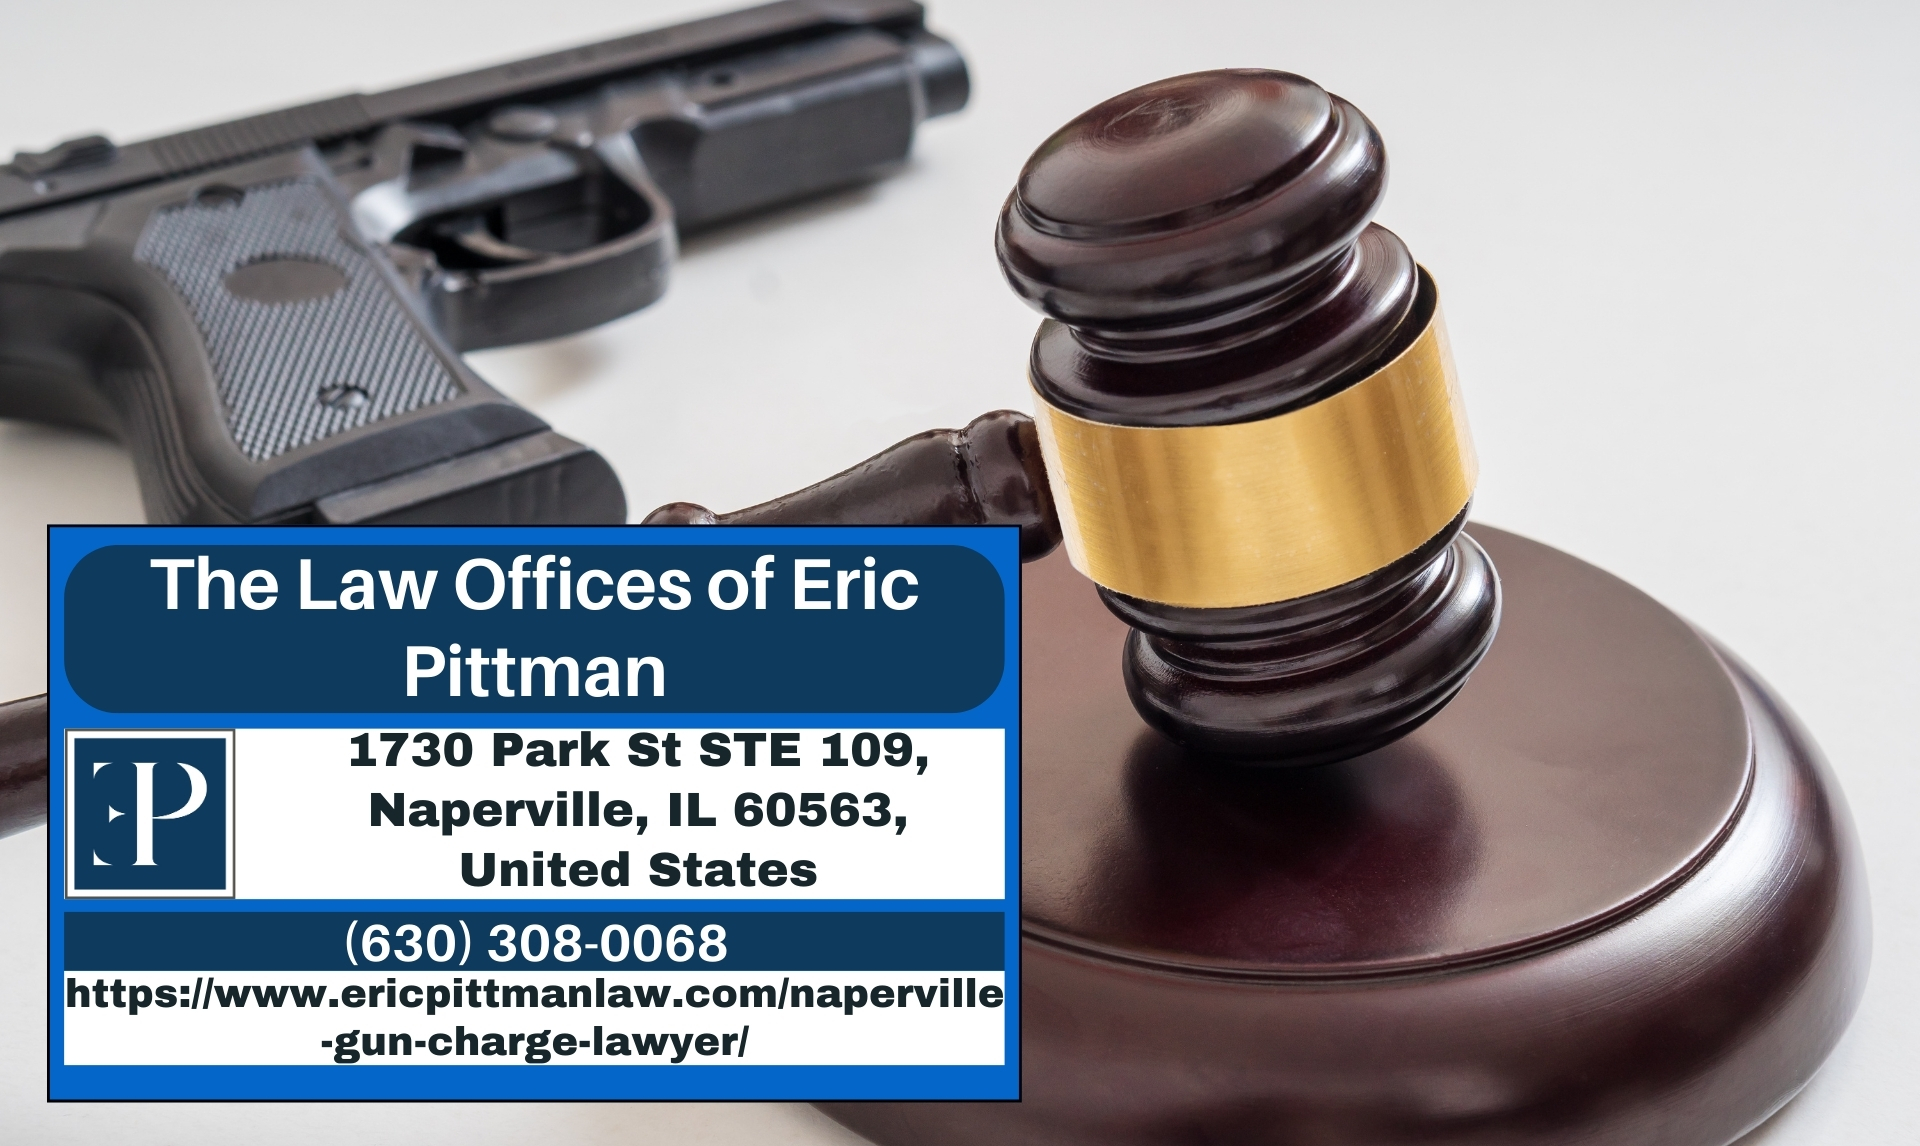 Naperville Gun Charge Lawyer Eric Pittman Releases Insightful 